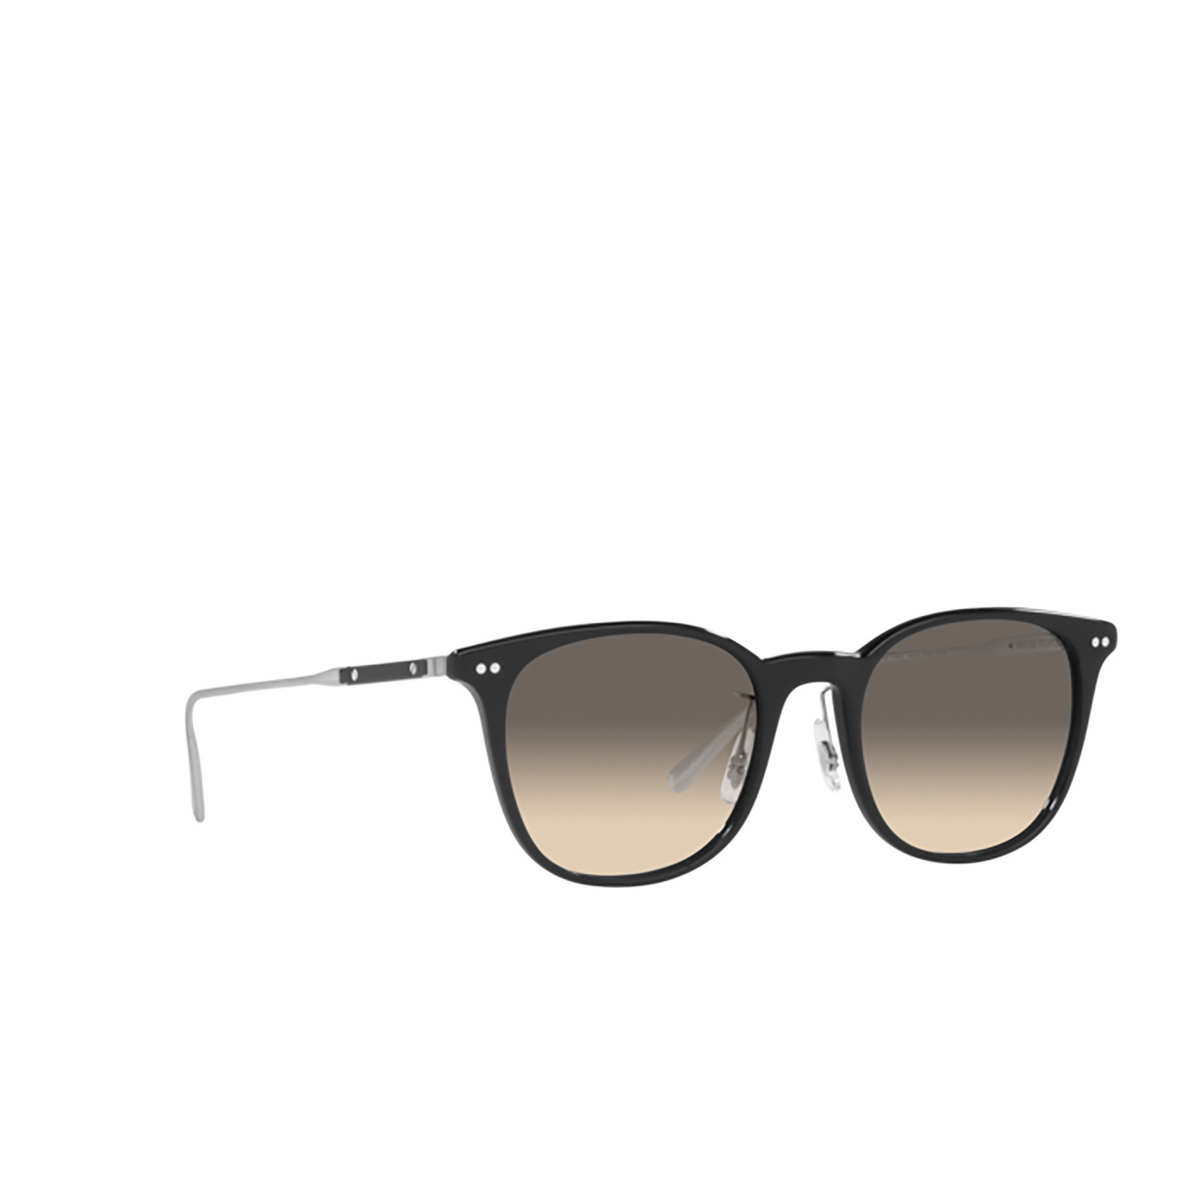 Oliver Peoples GERARDO Sunglasses 100532 Black / Brushed Silver - three-quarters view